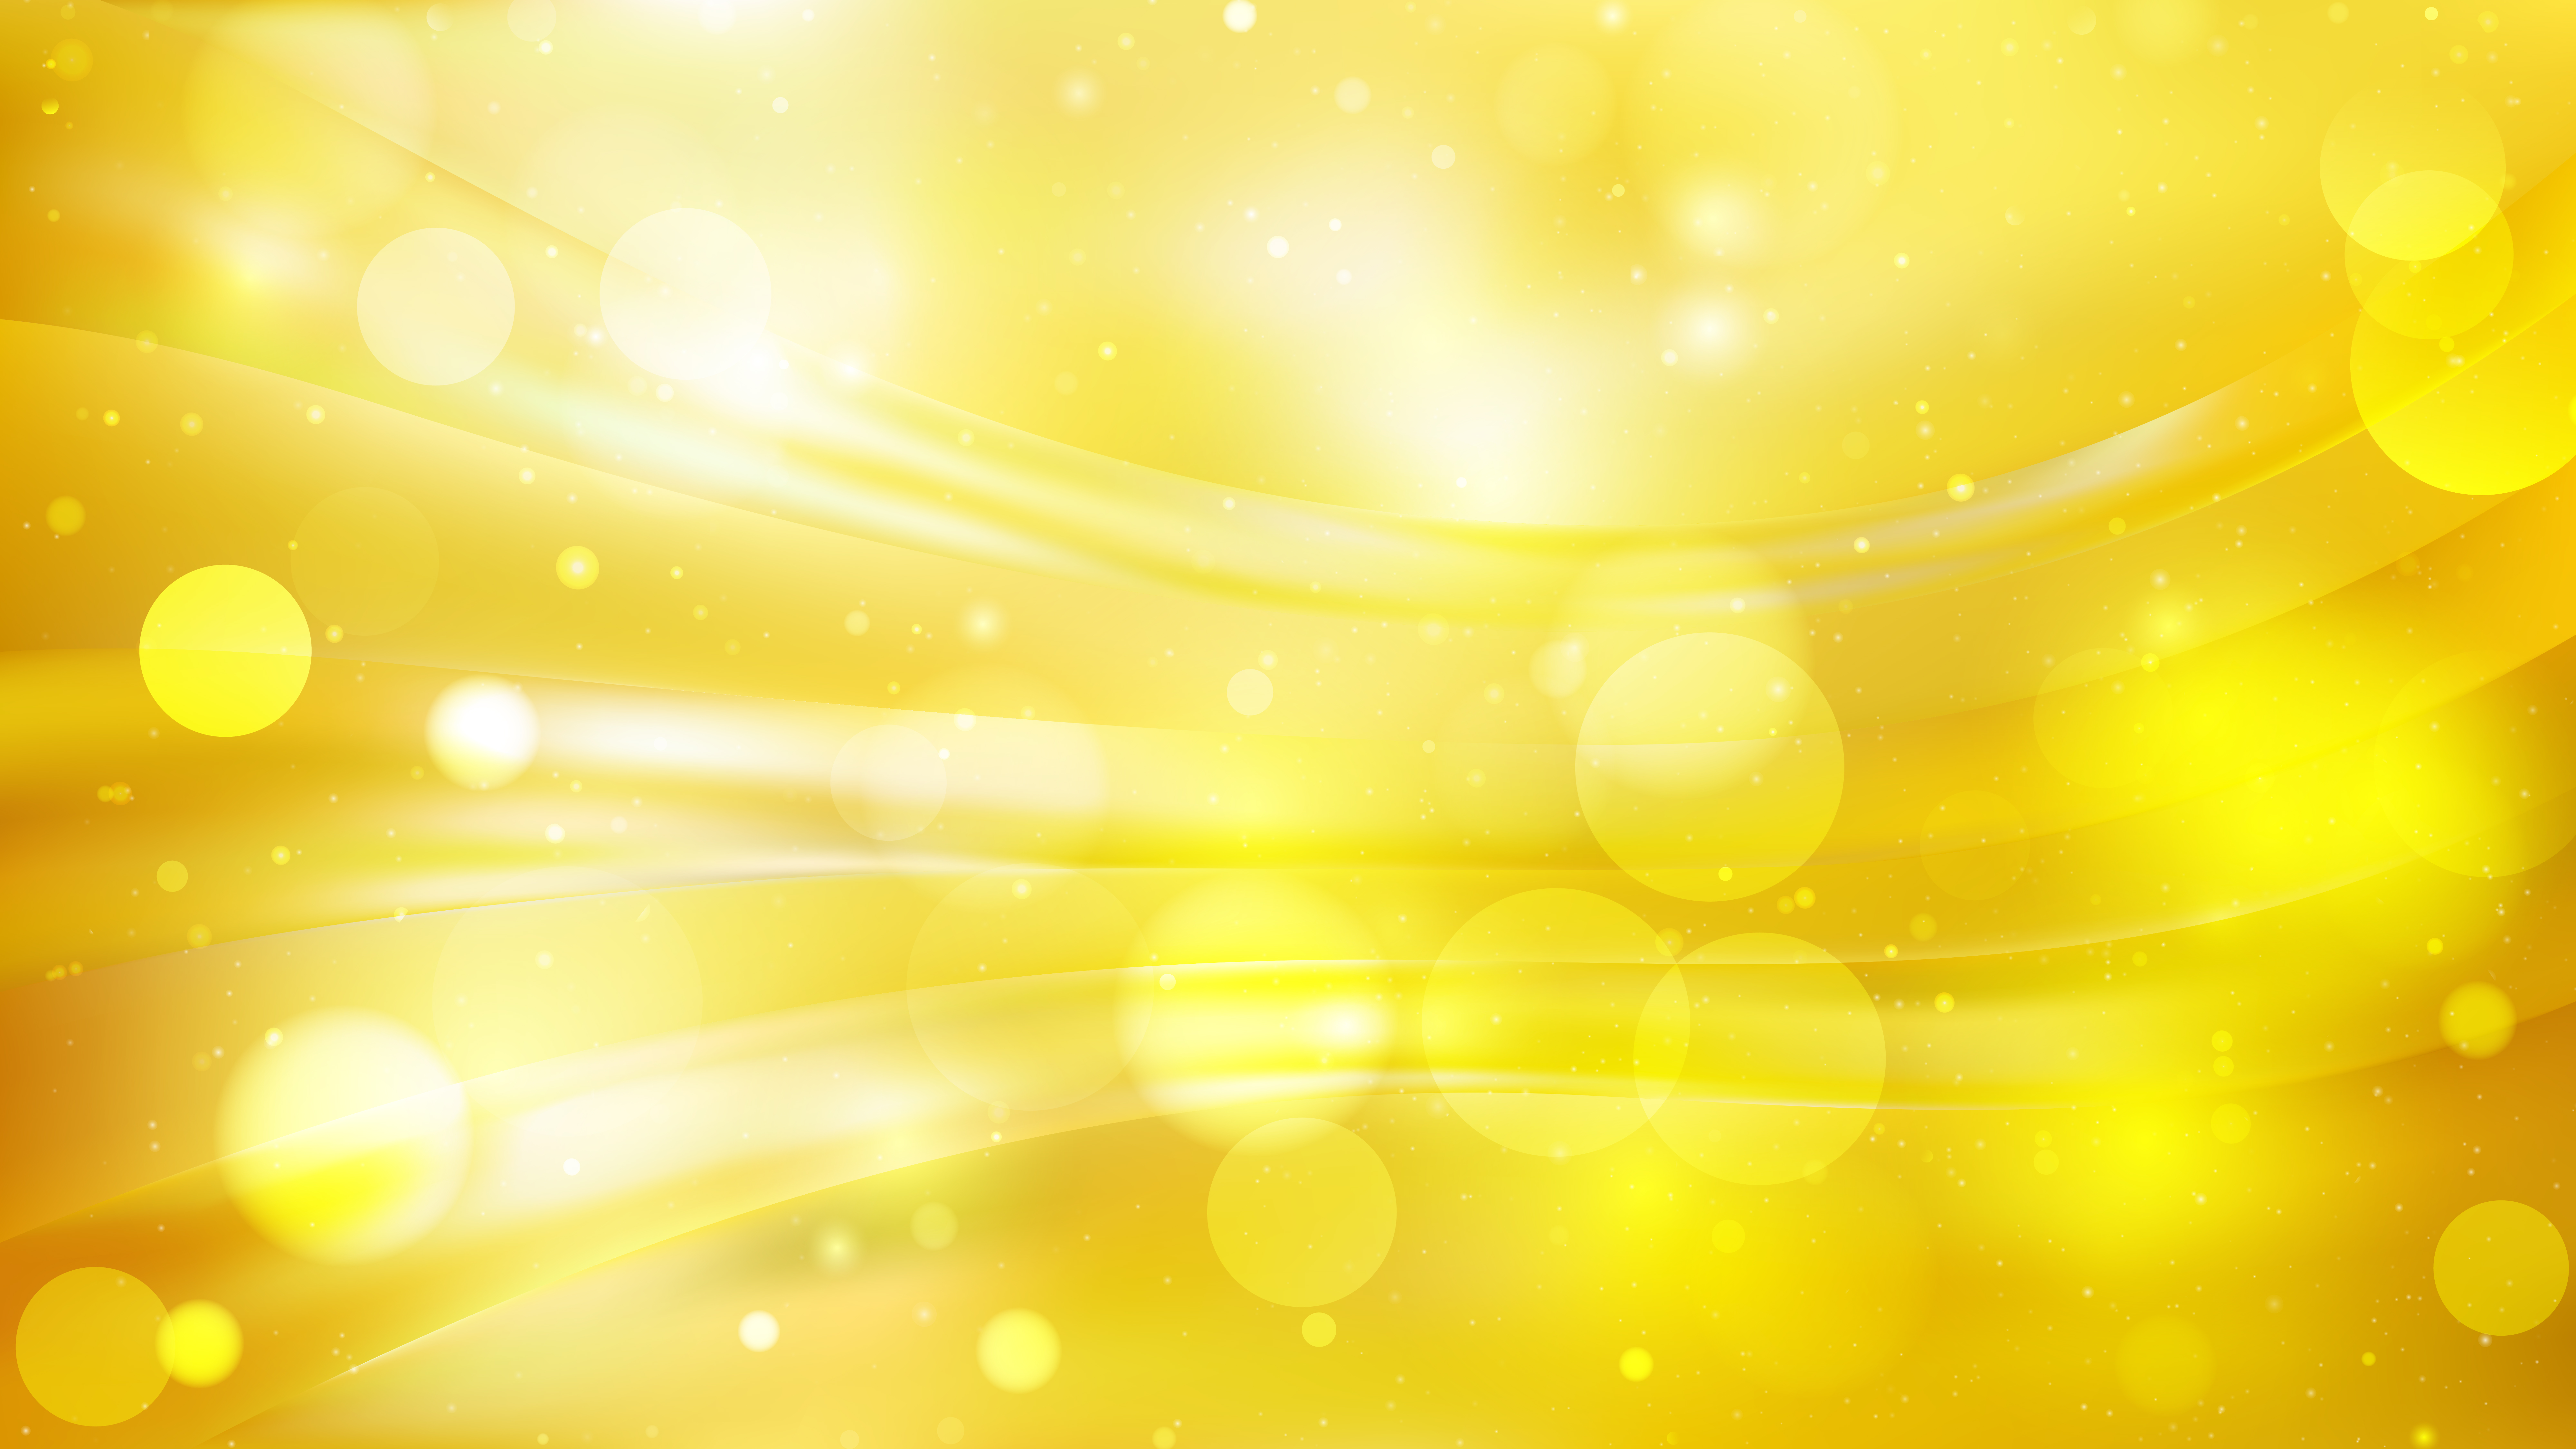 Abstract Orange And Yellow Lights Background Design